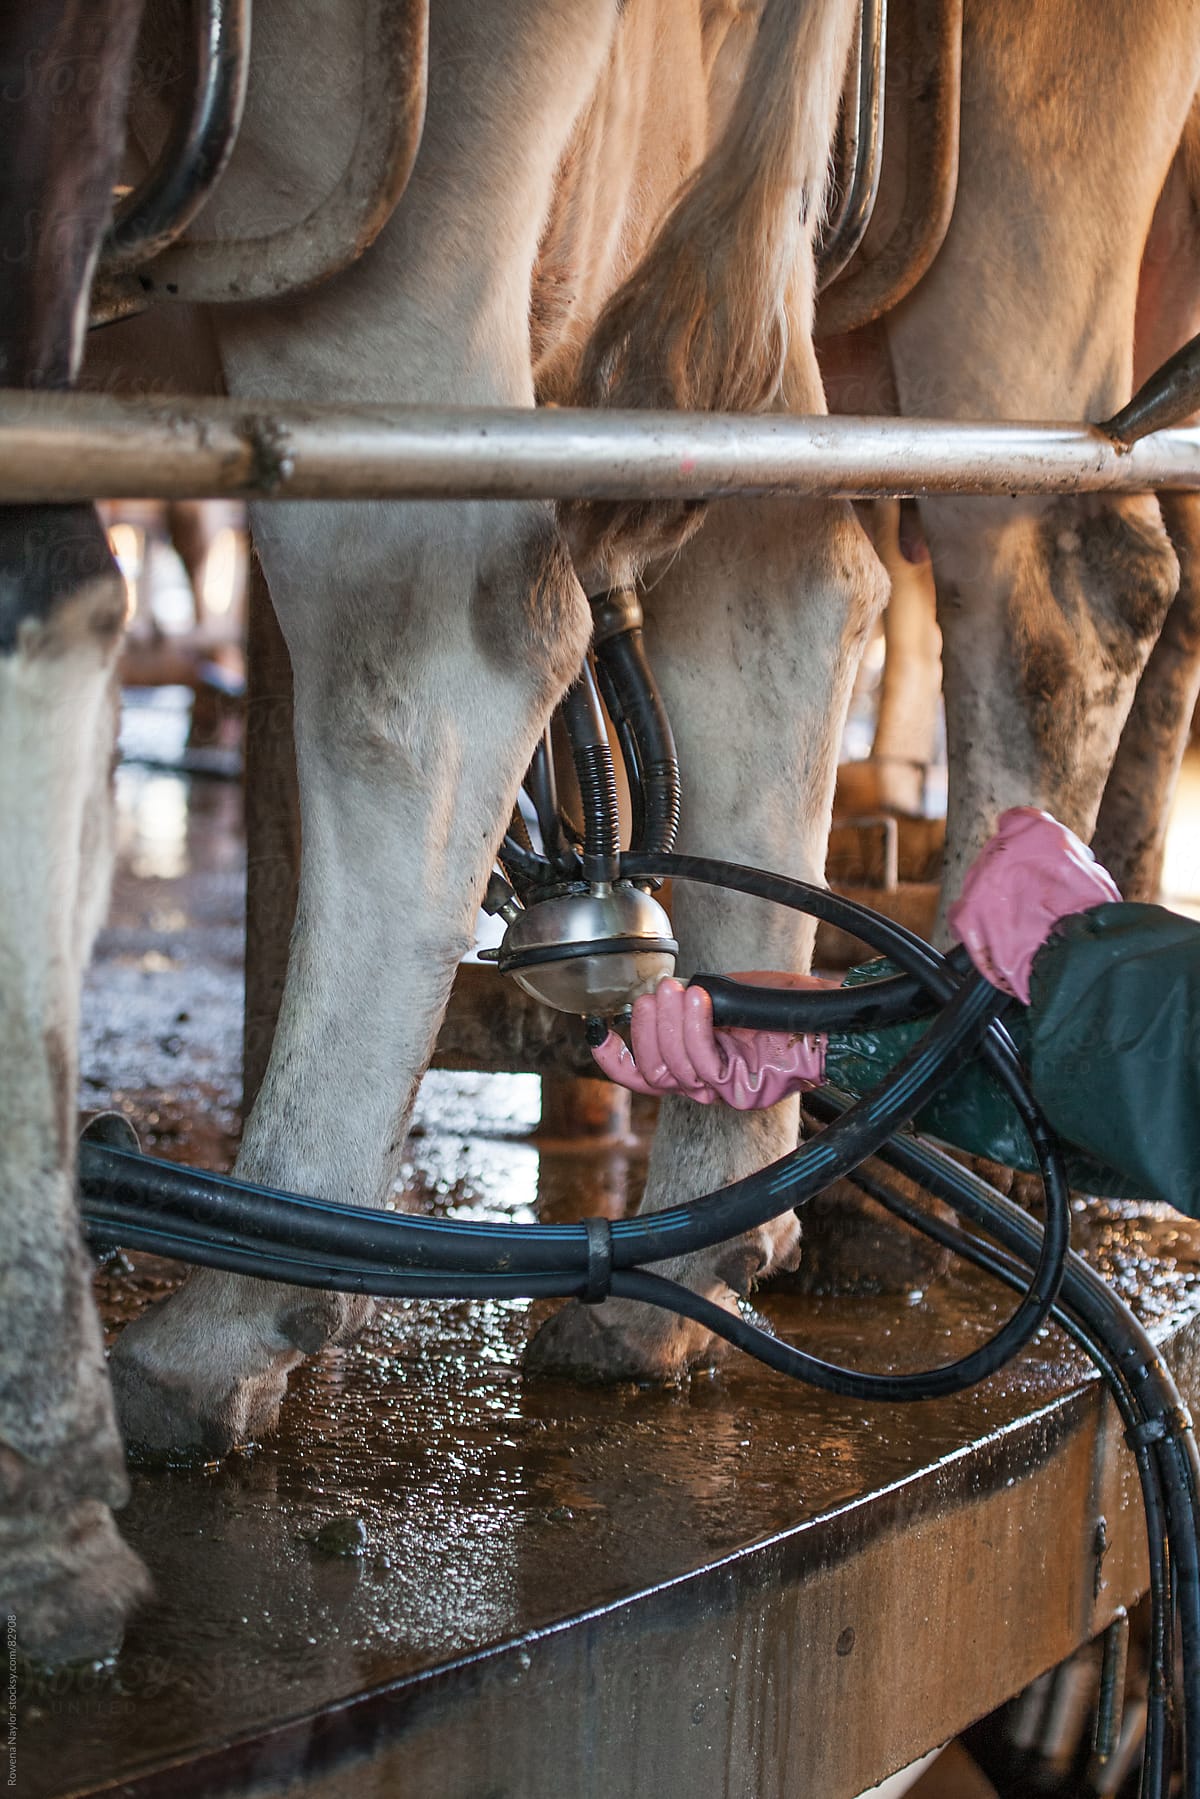 Farmer placing milking cups onto a cow